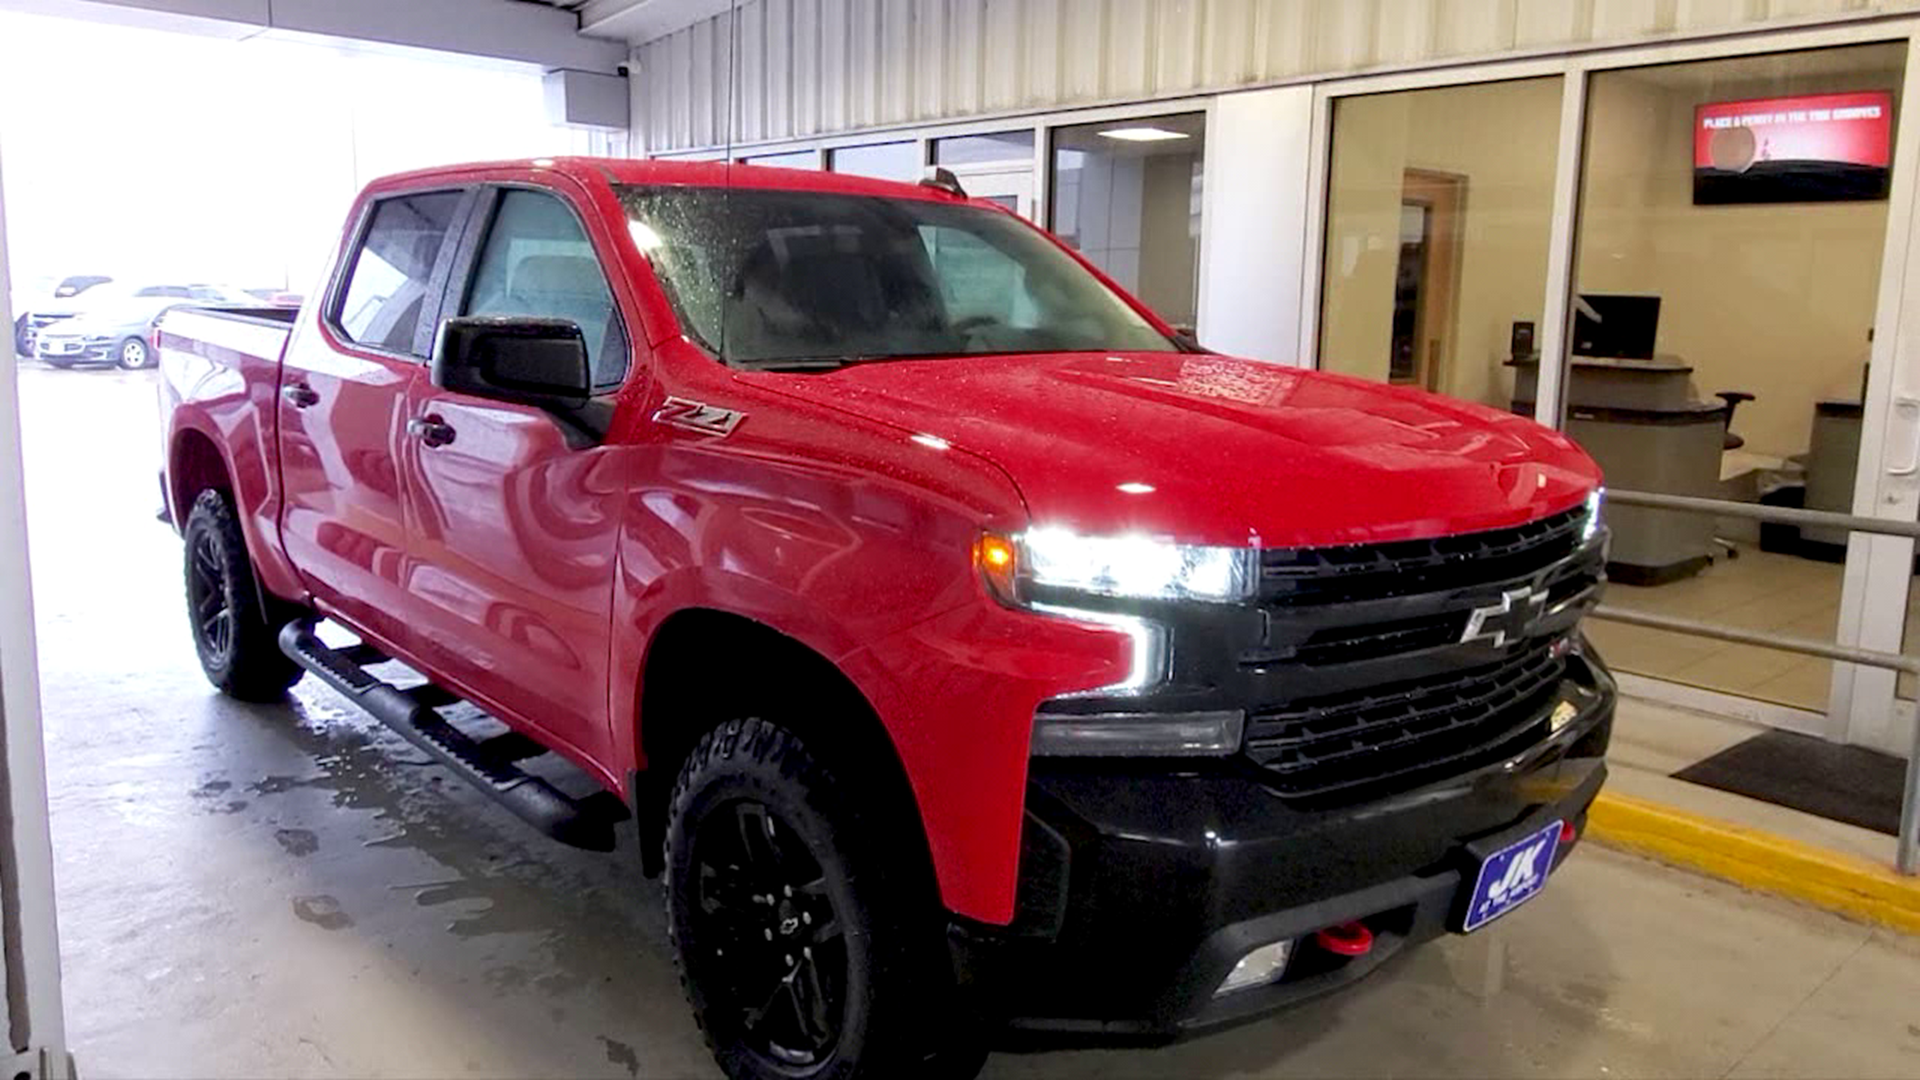 Check out our test drive of a 2019 Chevrolet Silverado Z71 Trail Boss Edition from JK Chevrolet in Nederland. Call (409) 726-8905 or visit http://JKChevrolet.com to get yours!